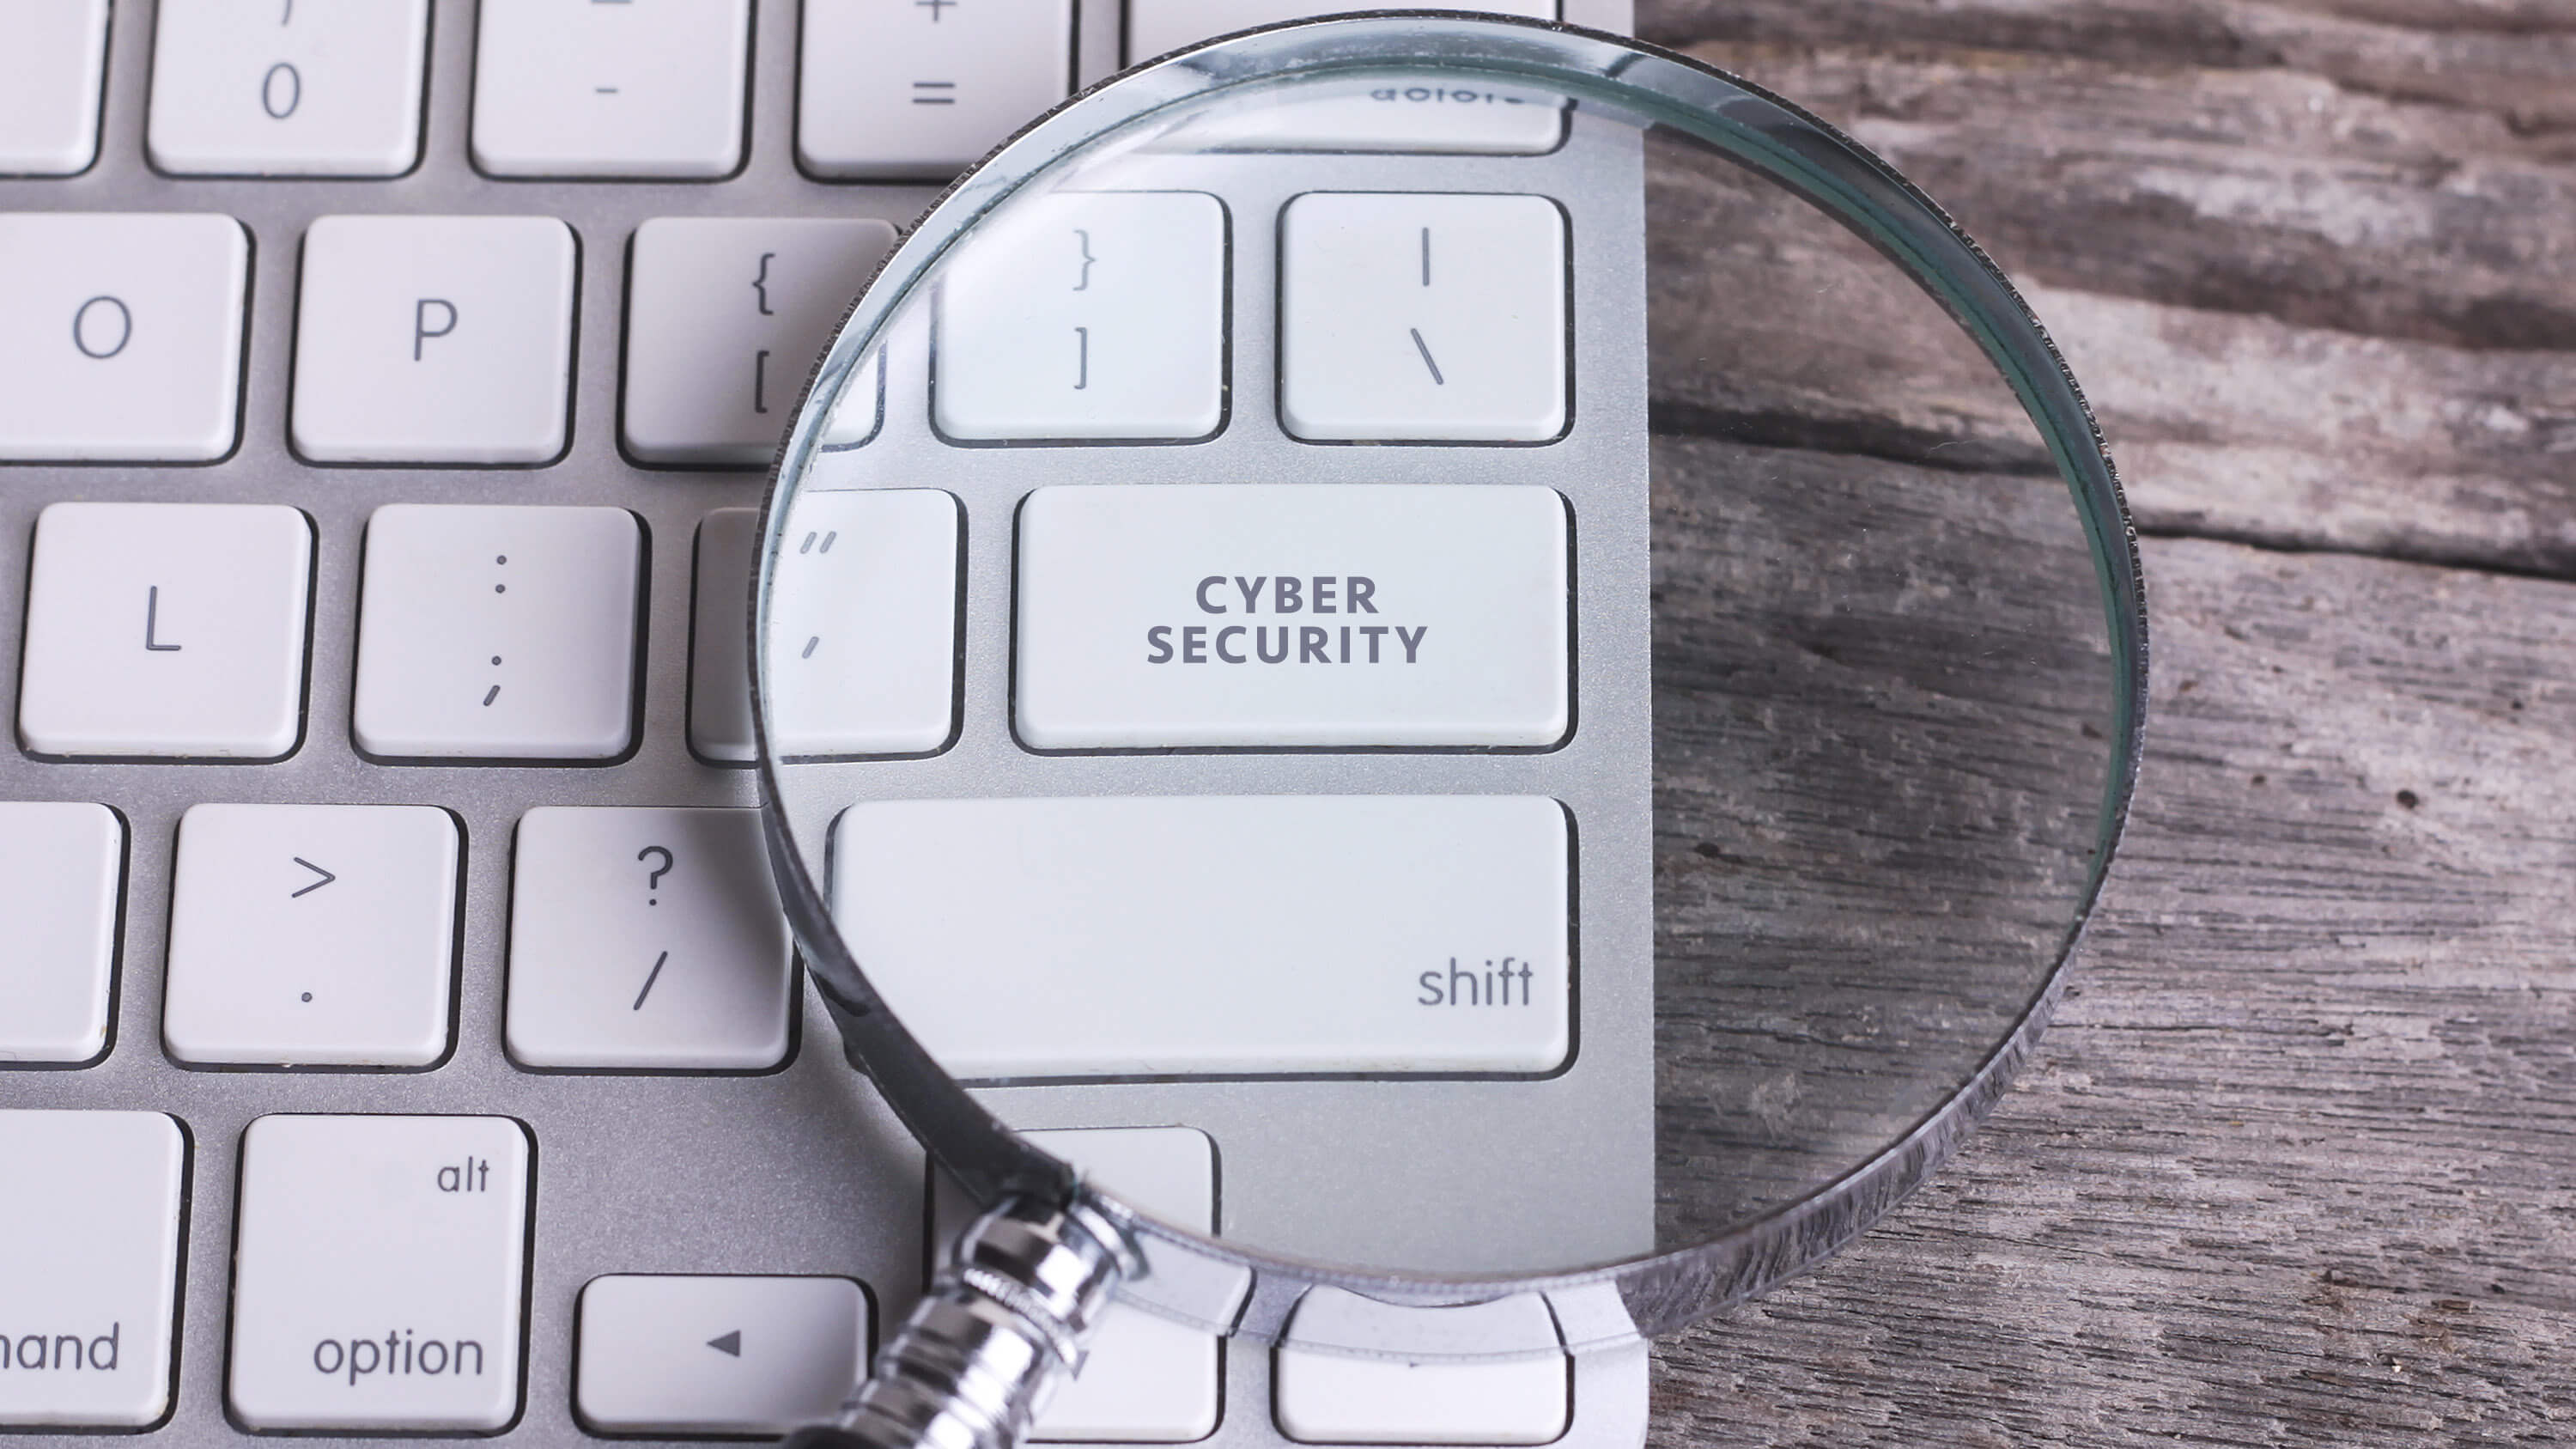 Let’s Talk About Security Skillsets and Cyber Certifications